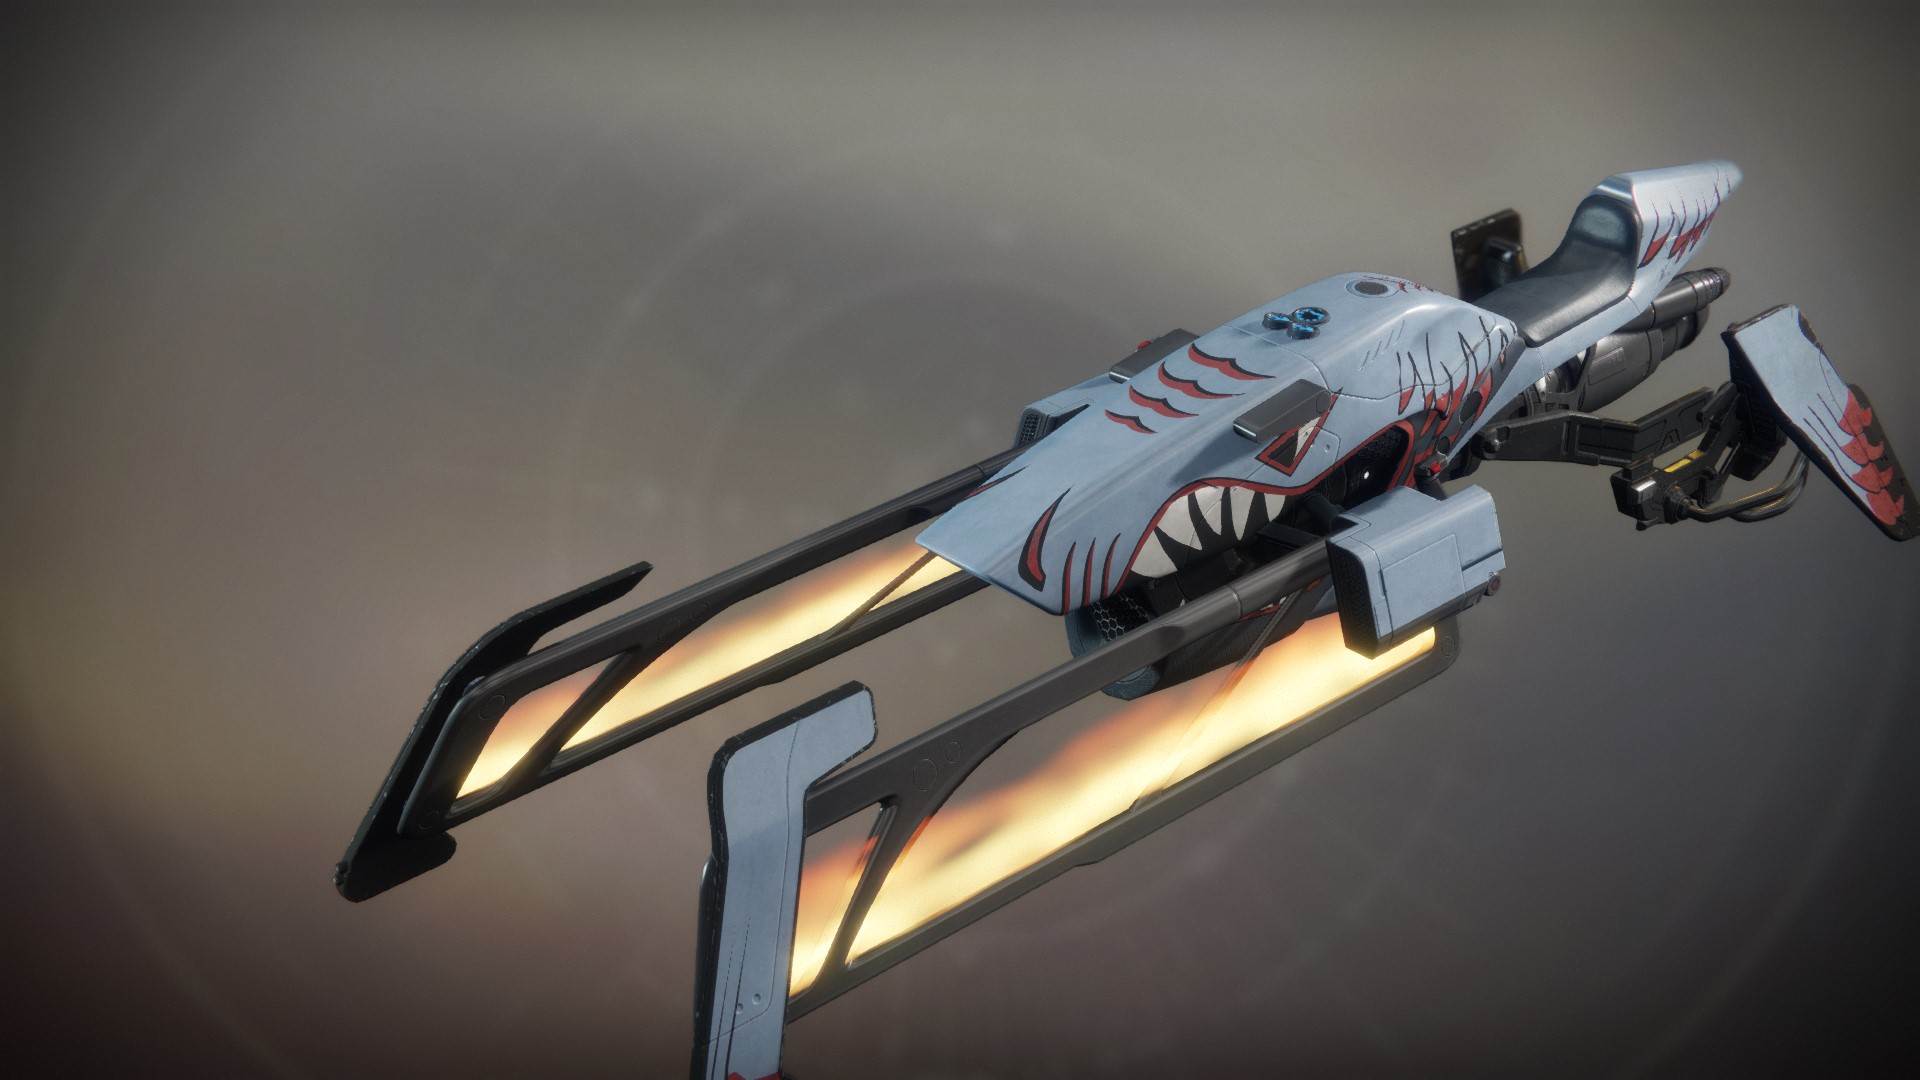 An in-game render of the SV-112 Predator.